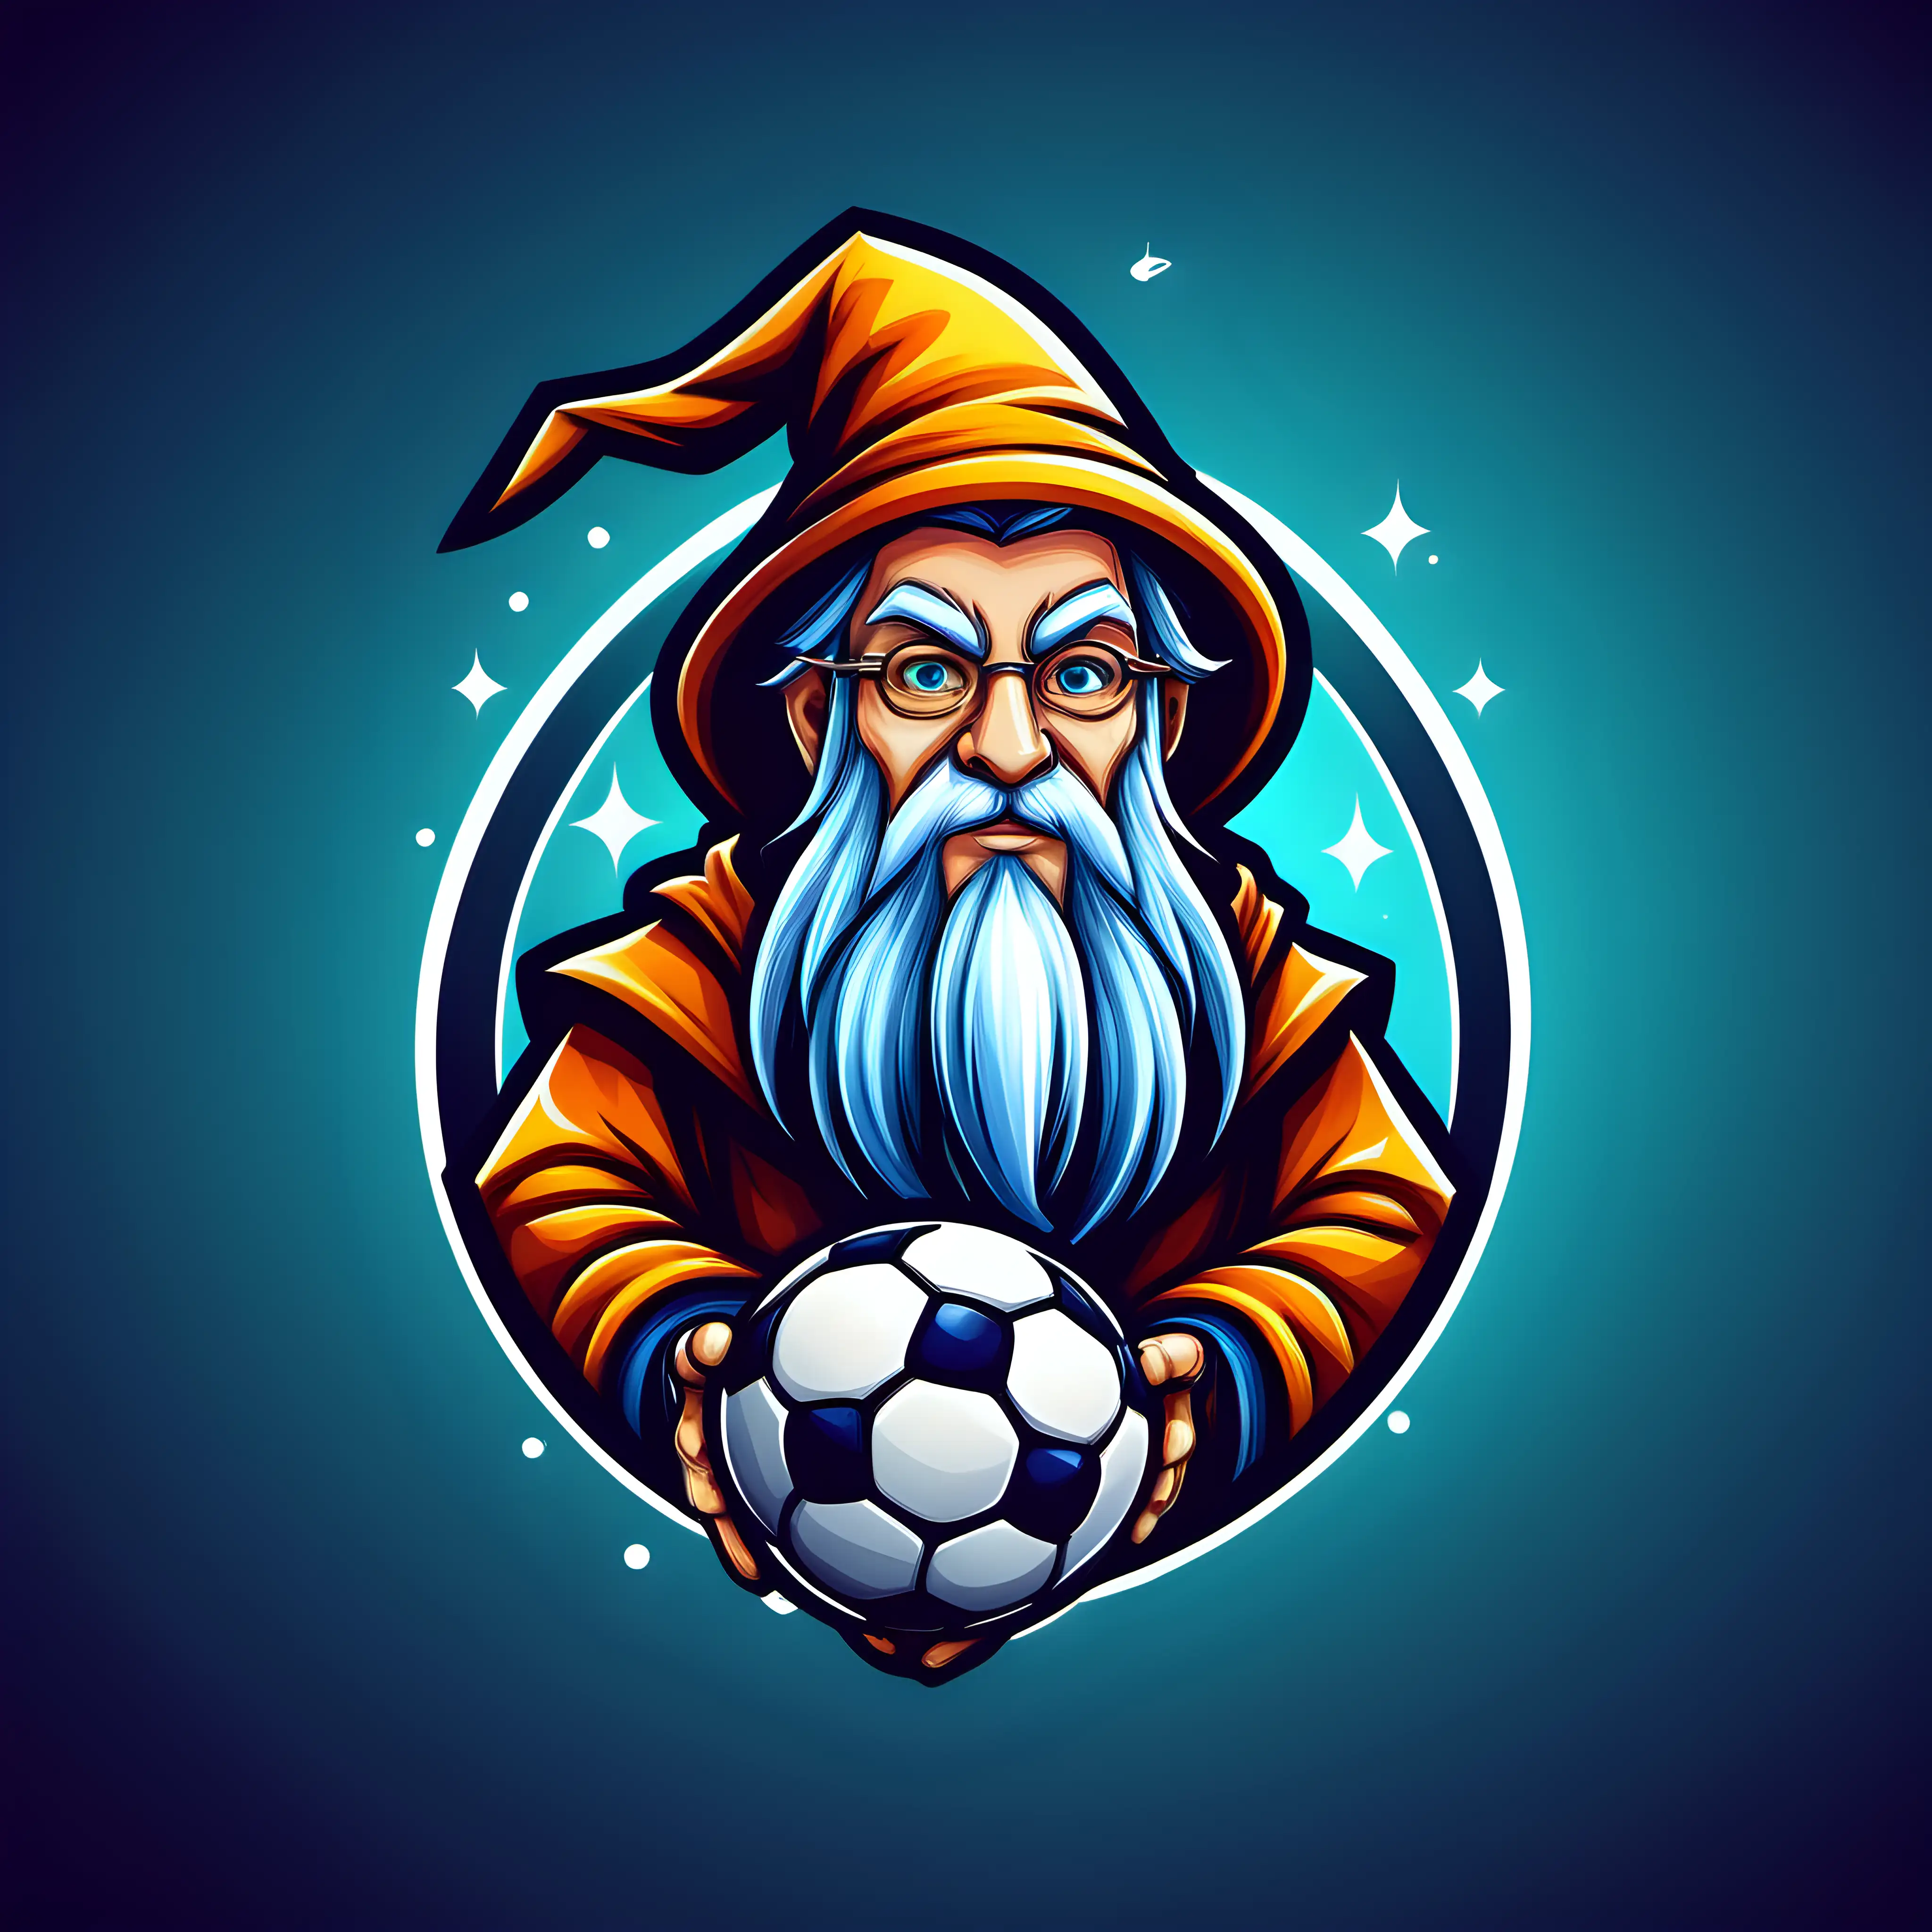 create a logo design for an app  , the logo should include a wizard and a soccer ball